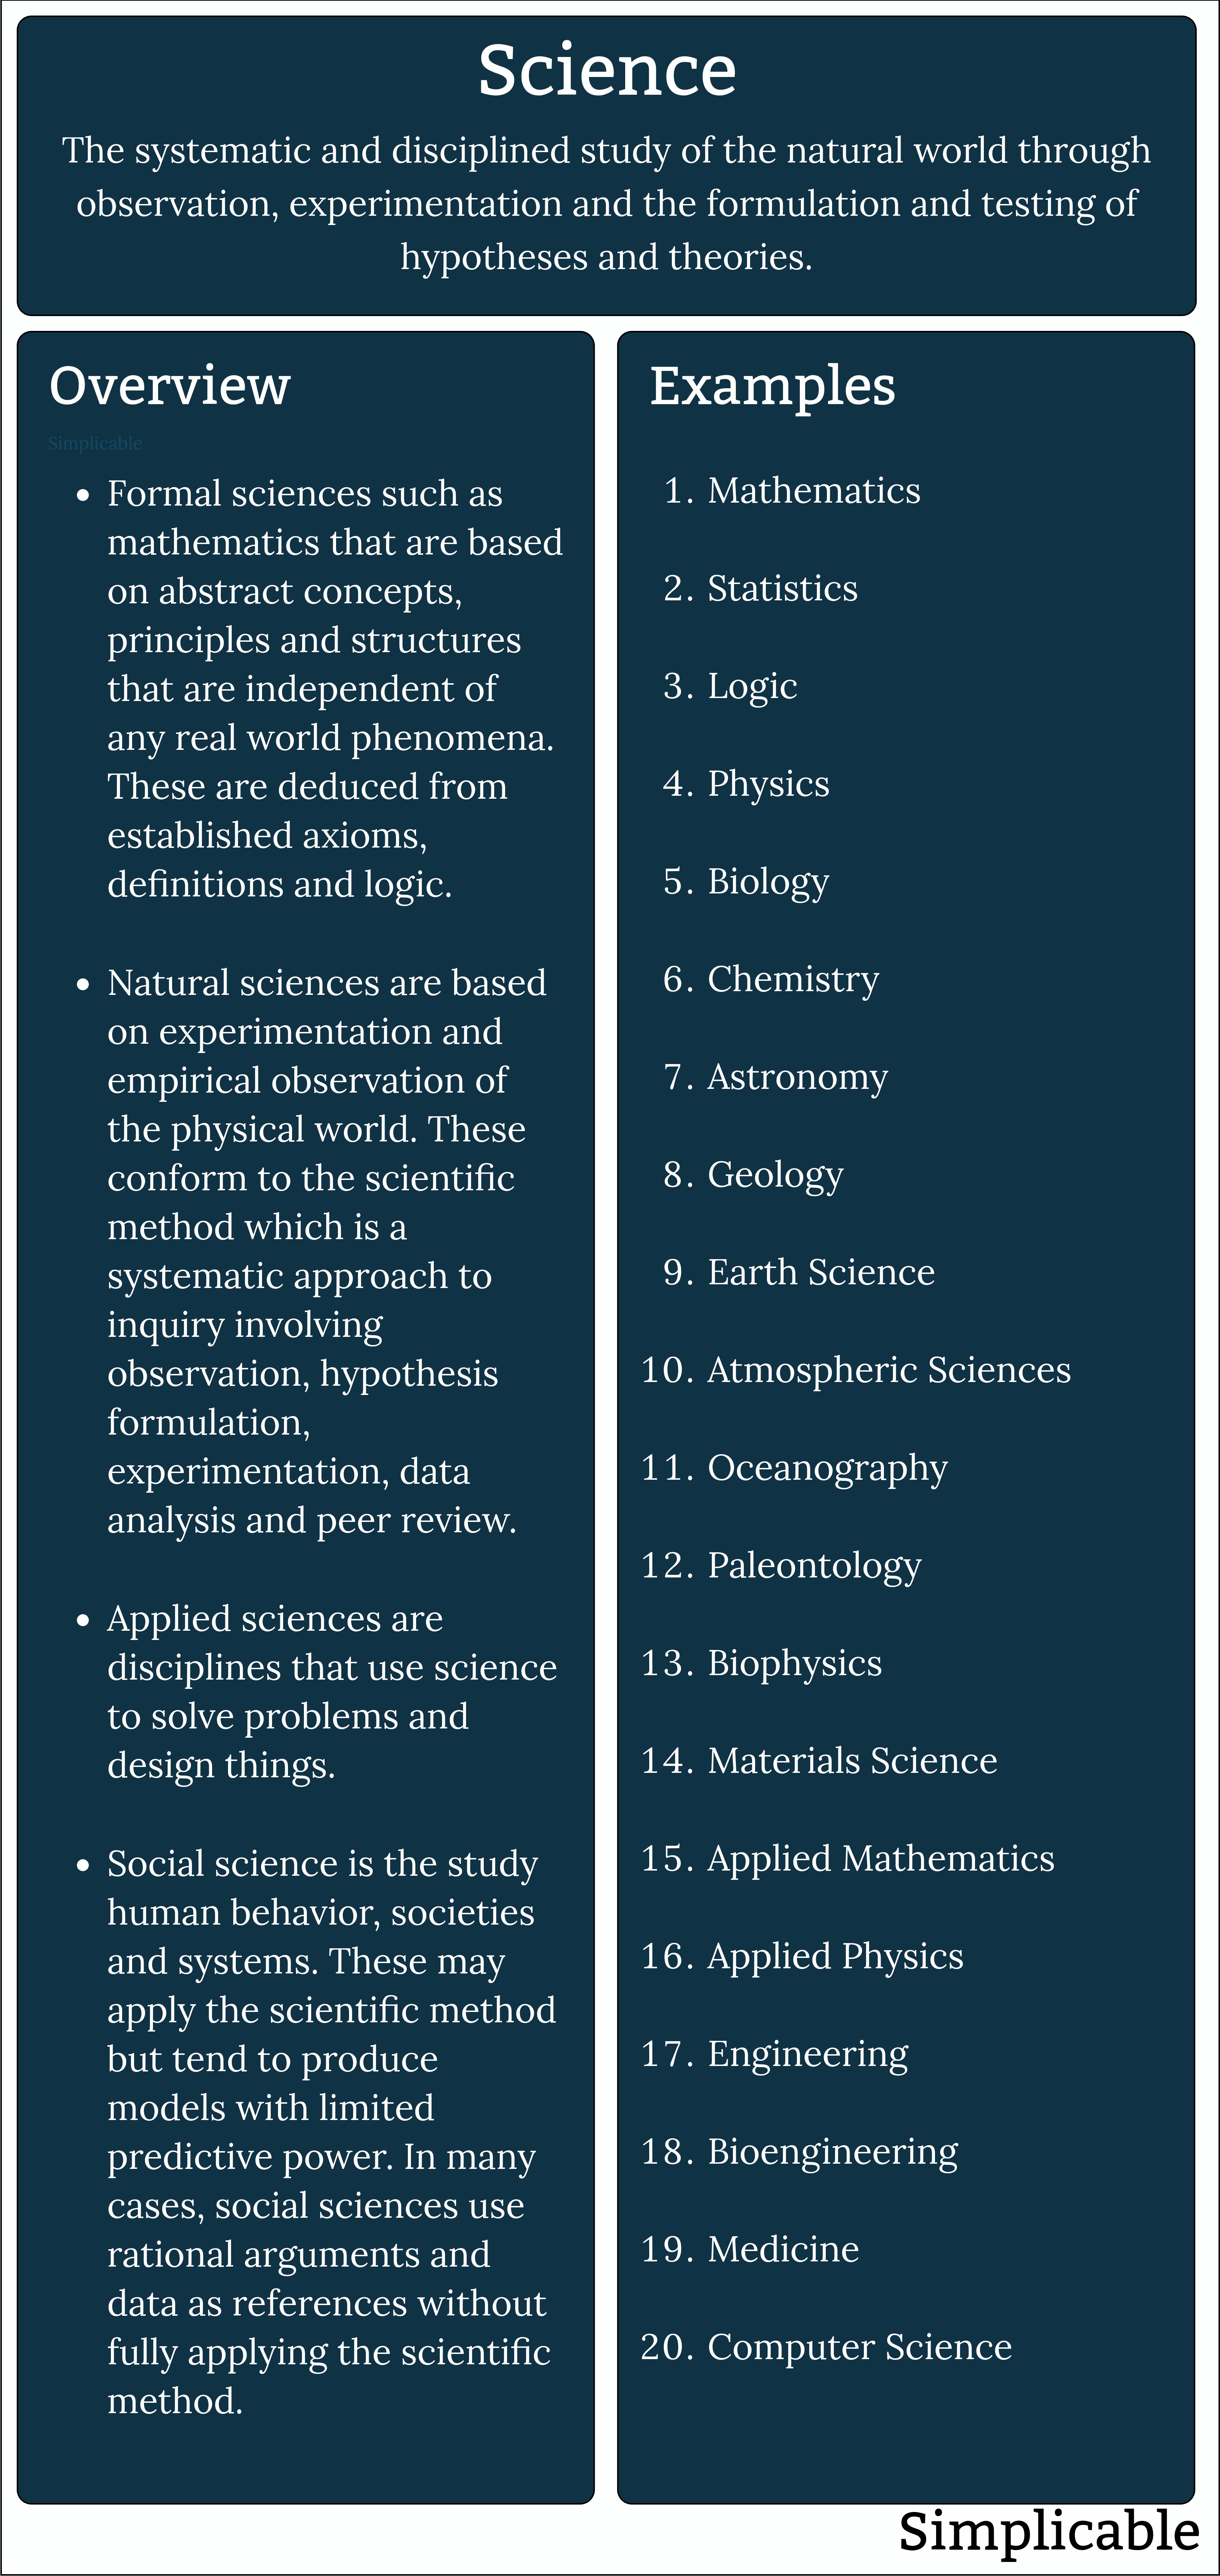 science overview and examples